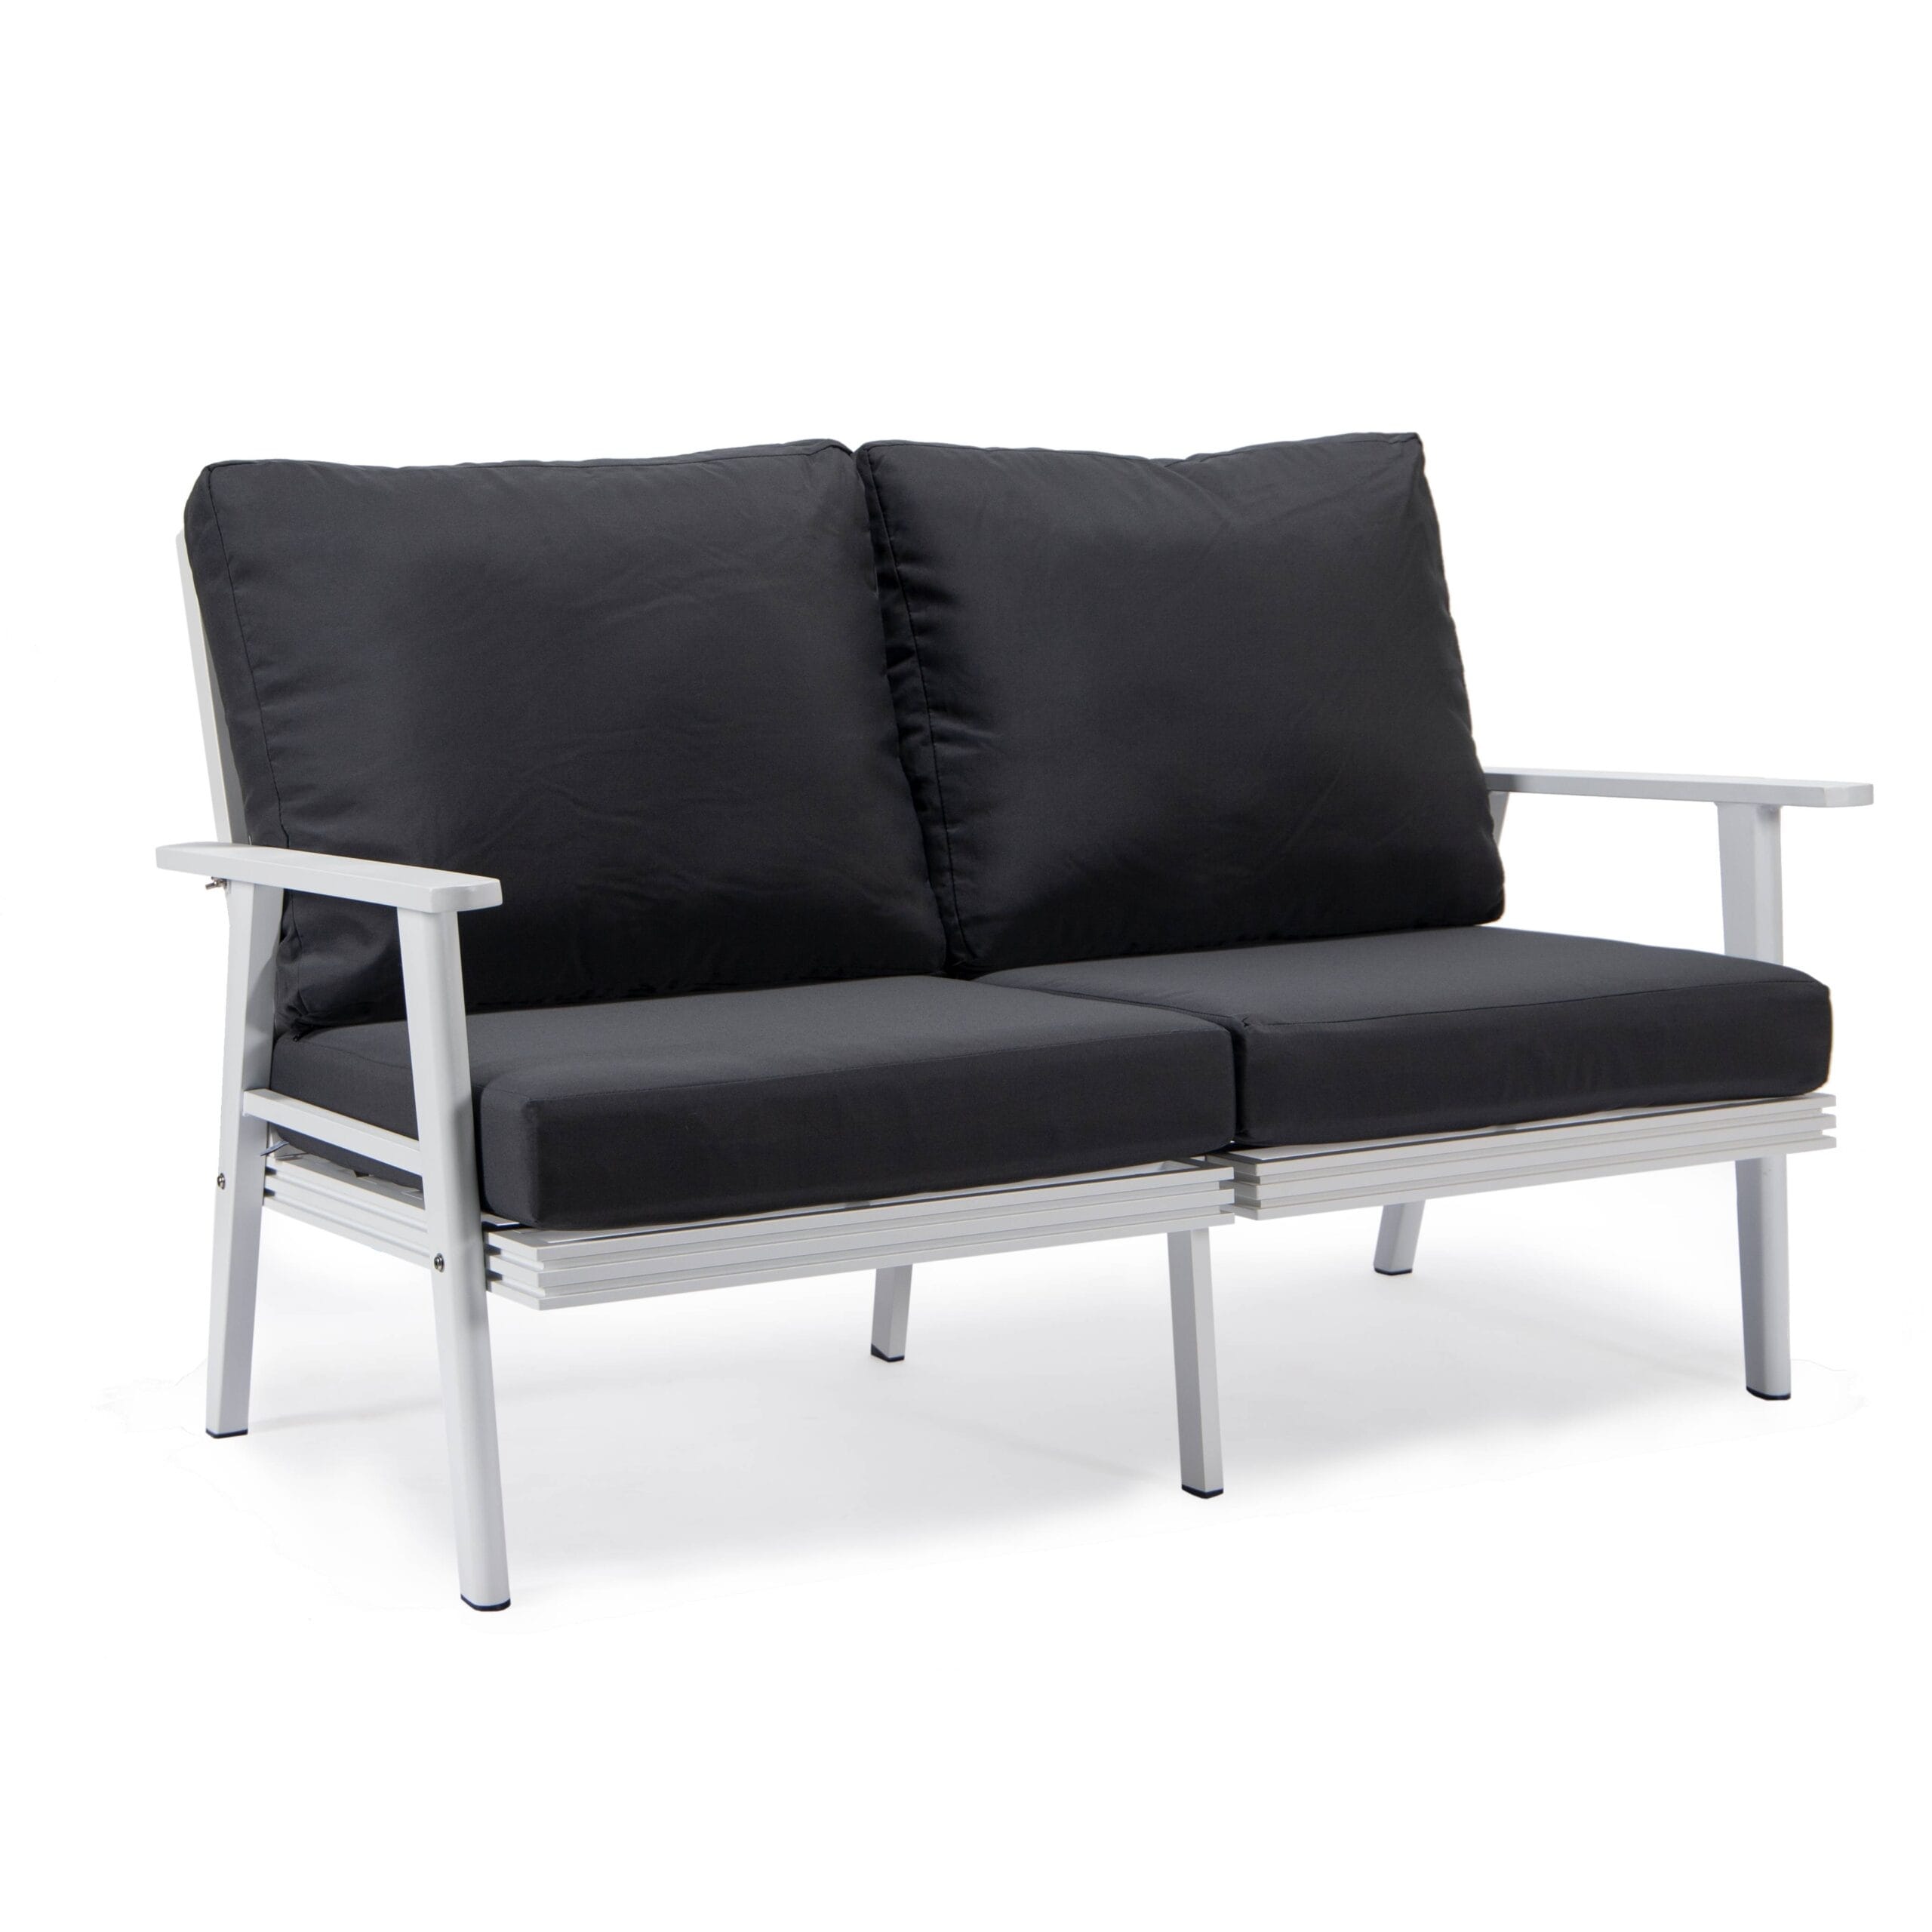 Leisuremod Walbrooke Patio Loveseat With White Aluminum Frame And Removable Cushions - 56.69